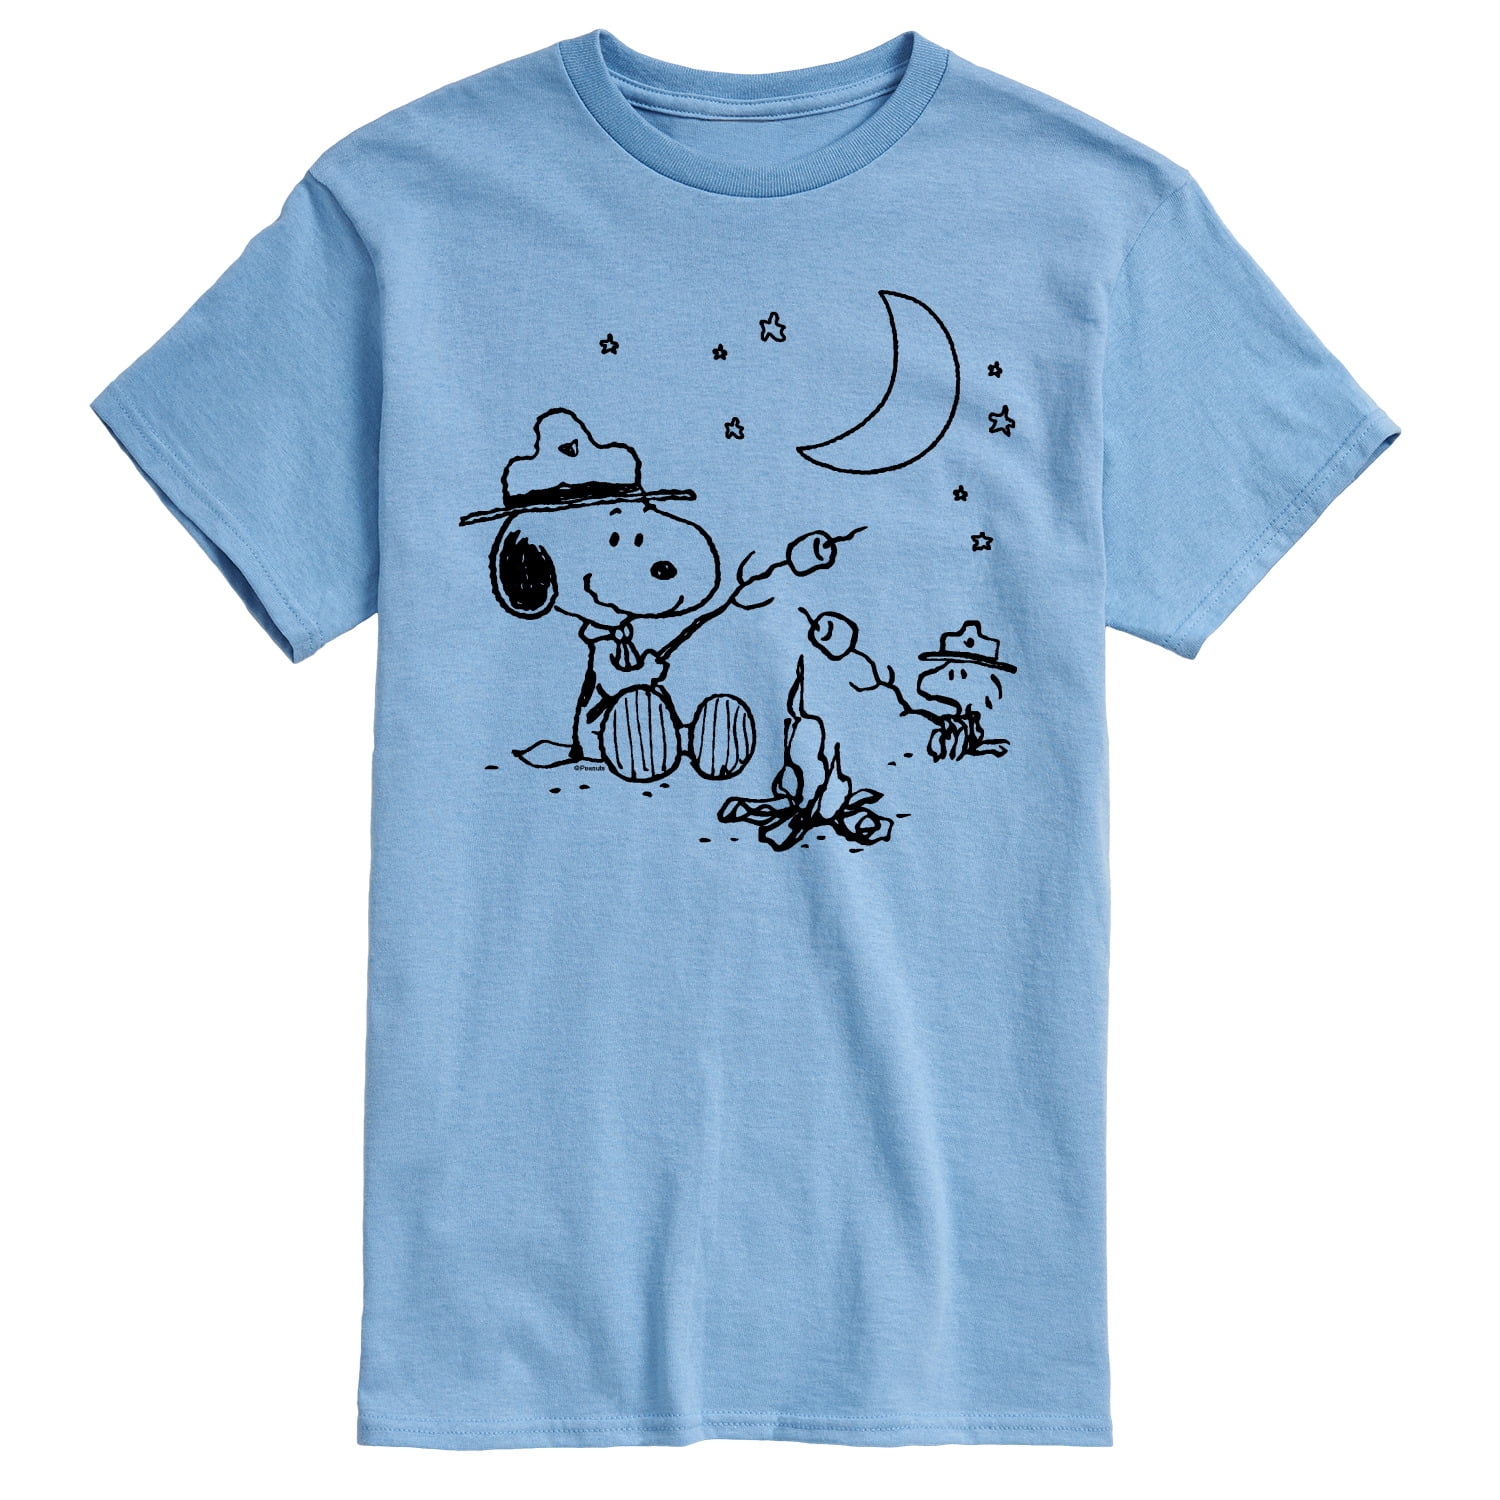 Peanuts - Snoopy Camping - Men\'s Short Sleeve Graphic T-Shirt